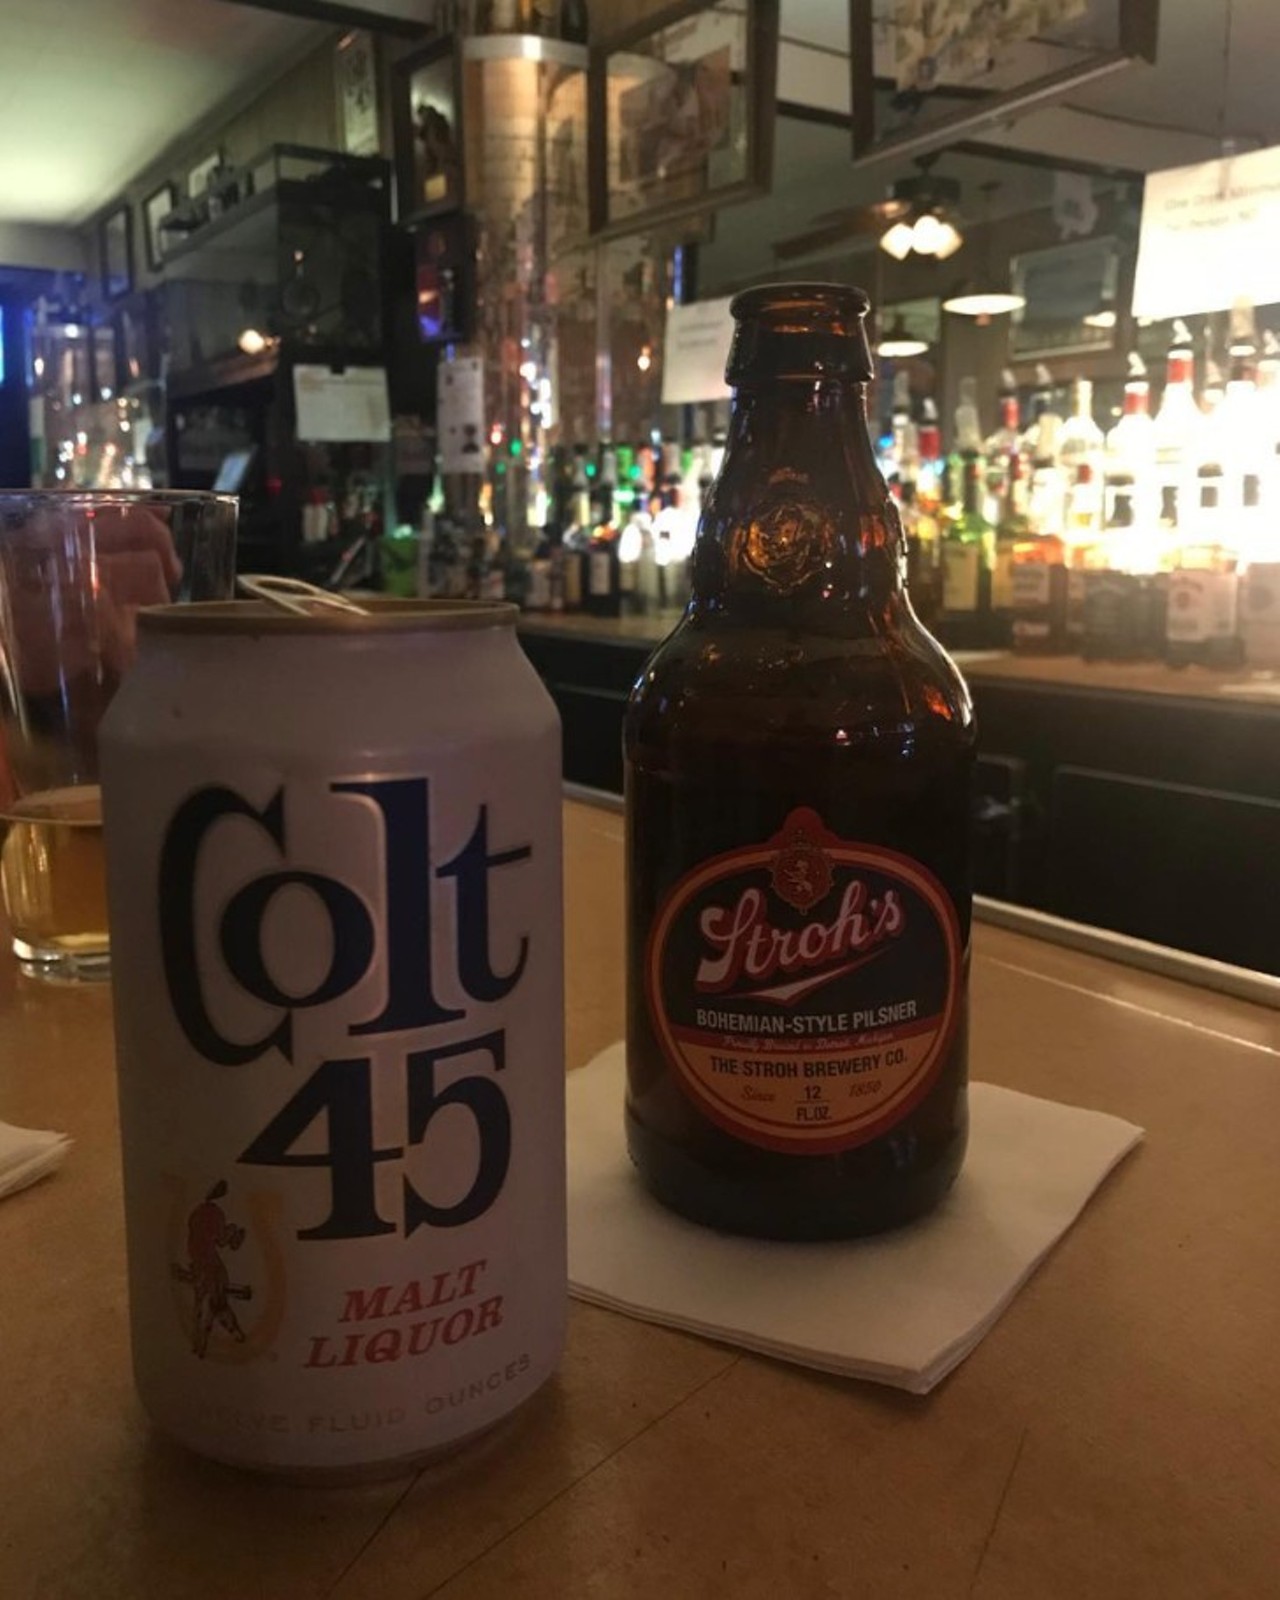 LJ&#146;s Lounge
2114 Michigan Ave., Detroit
Head to LJ&#146;s Lounge from 9 p.m. to 12 a.m. for 5 bottles of Miller Life for just $12, or get a $5 cinnamon toast crunch shot.
Photo with permission from @the_shutterpug_photo